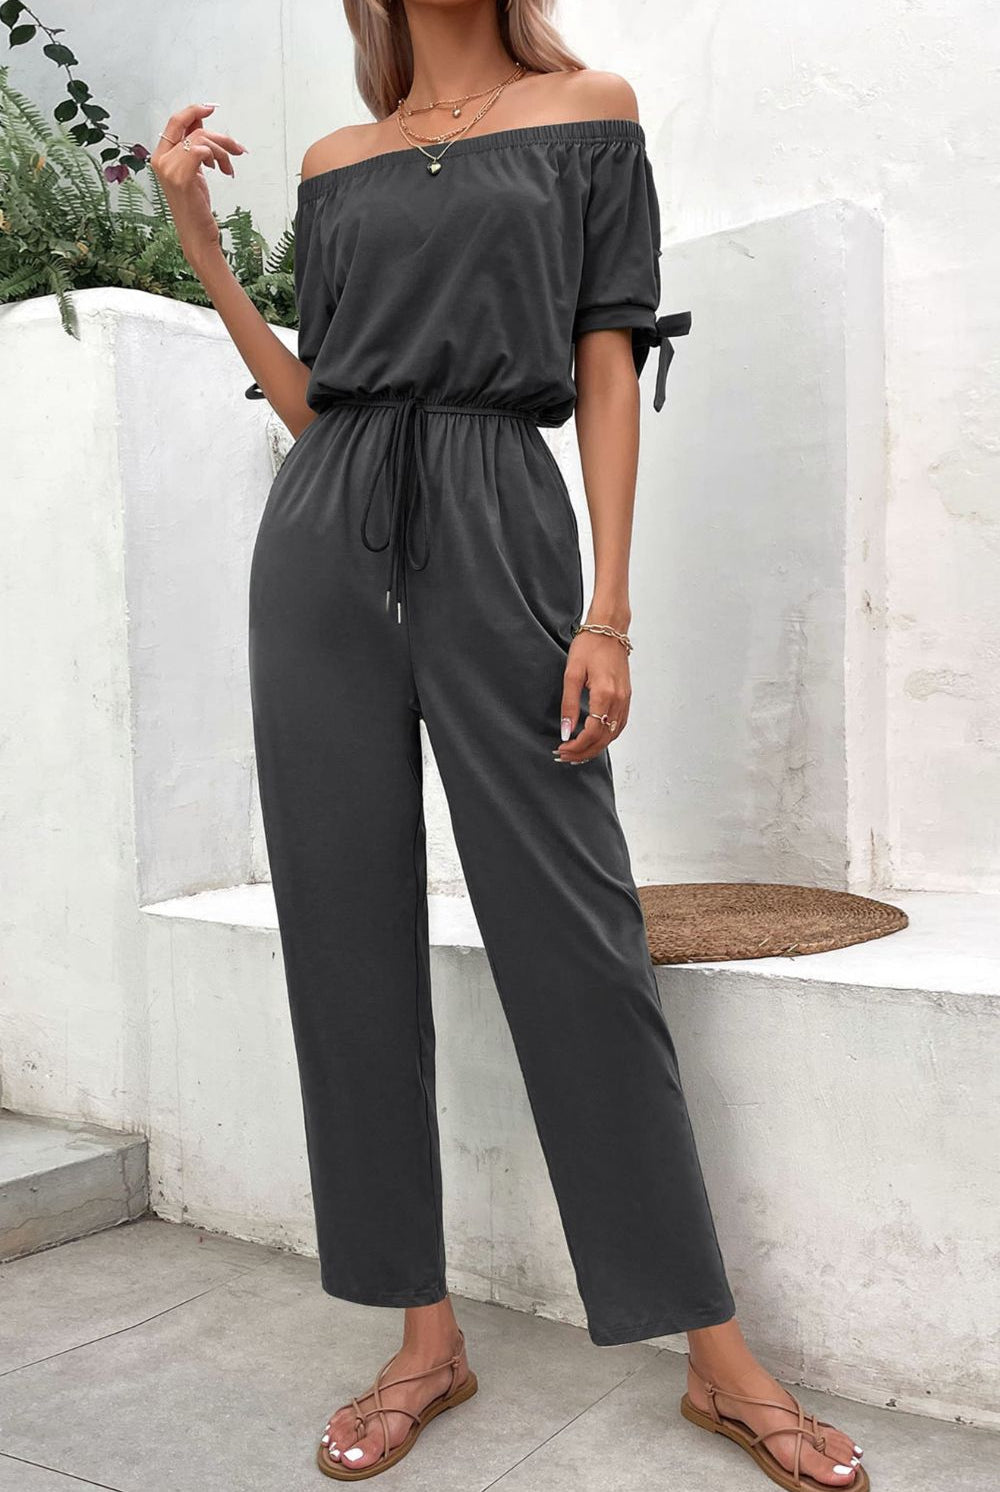 Light Gray Off-Shoulder Tie Cuff Jumpsuit with Pockets Clothing